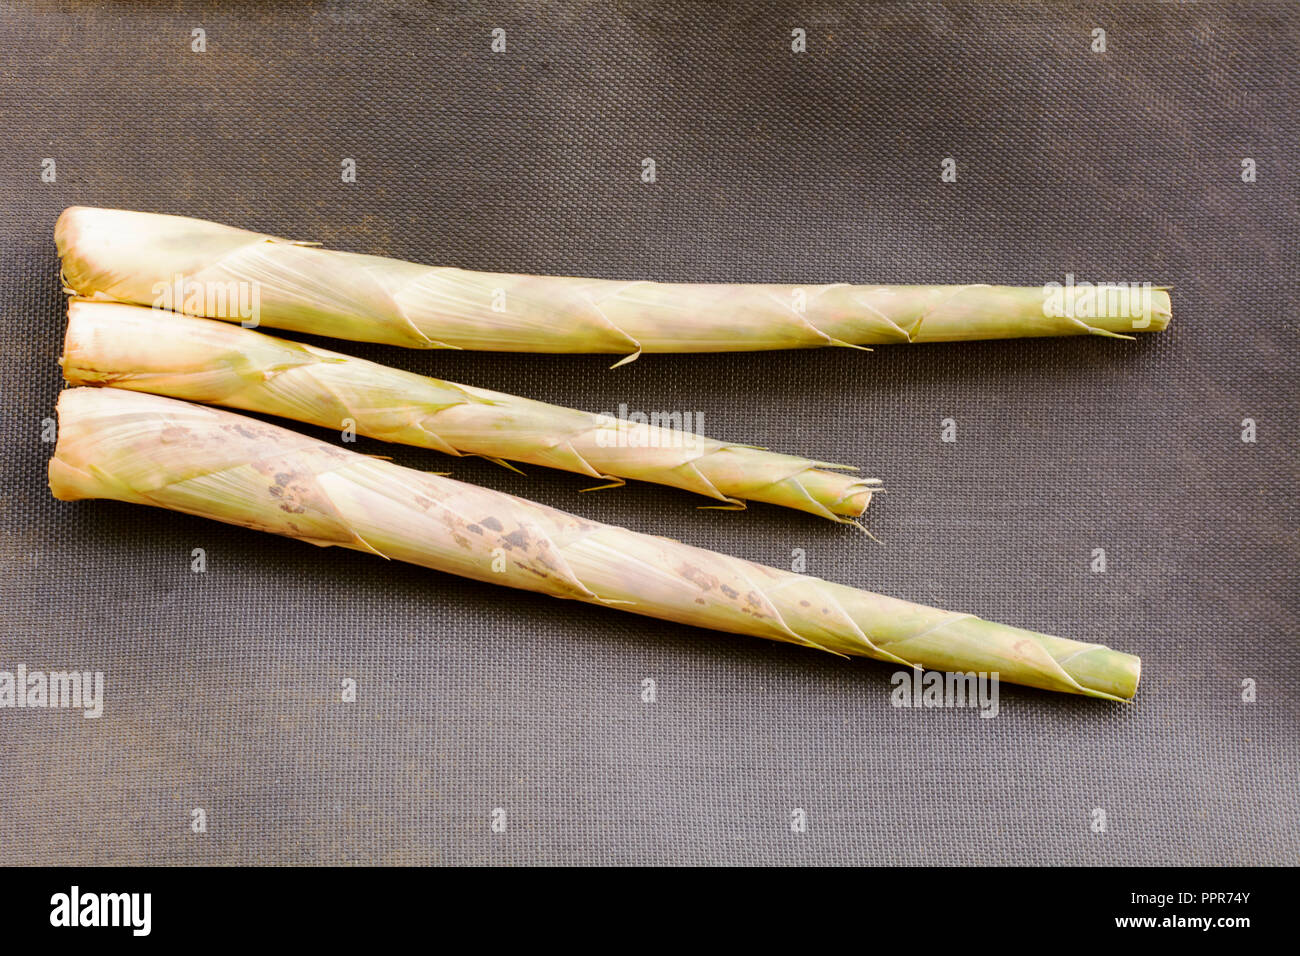 Bamboo shoots or bamboo sprouts are the edible shoots Stock Photo